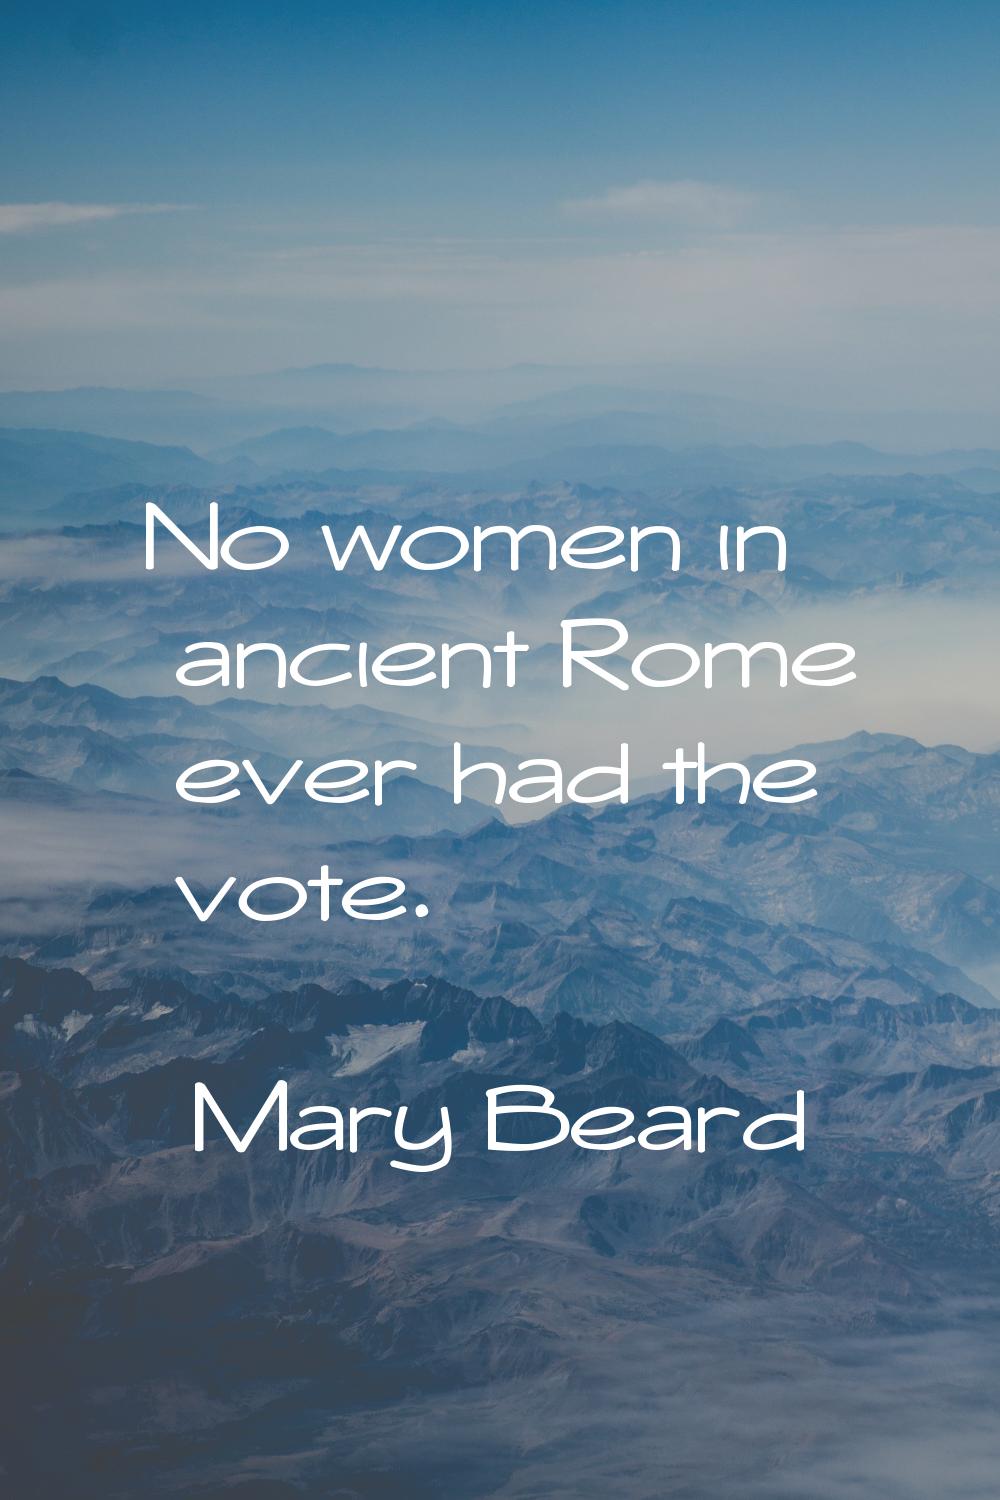 No women in ancient Rome ever had the vote.